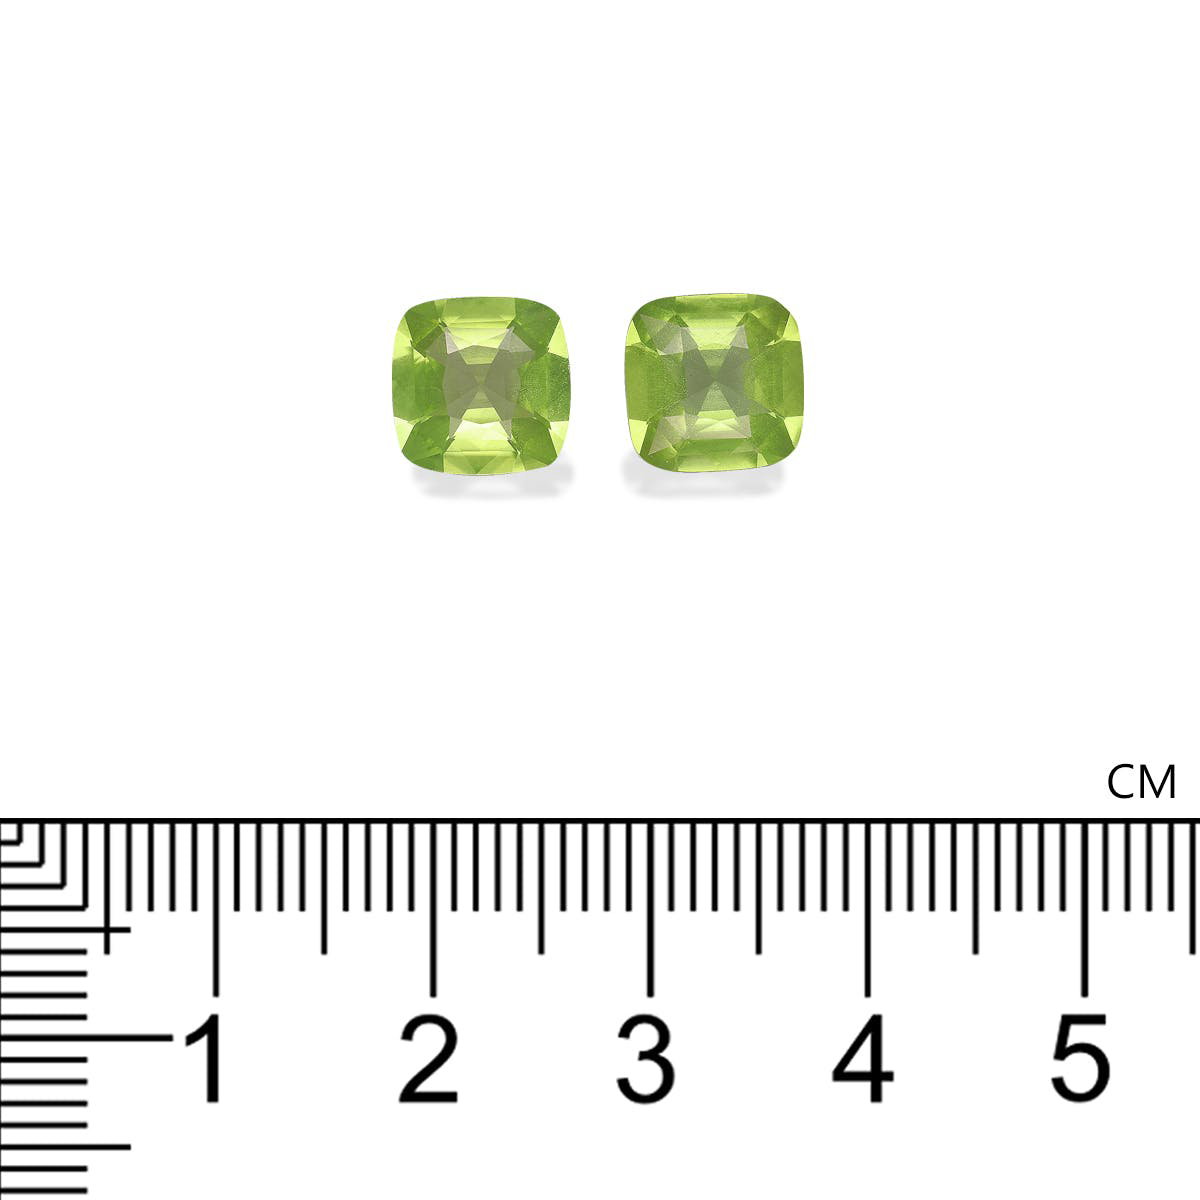 Picture of Lime Green Peridot 4.22ct - 8mm Pair (PD0120)